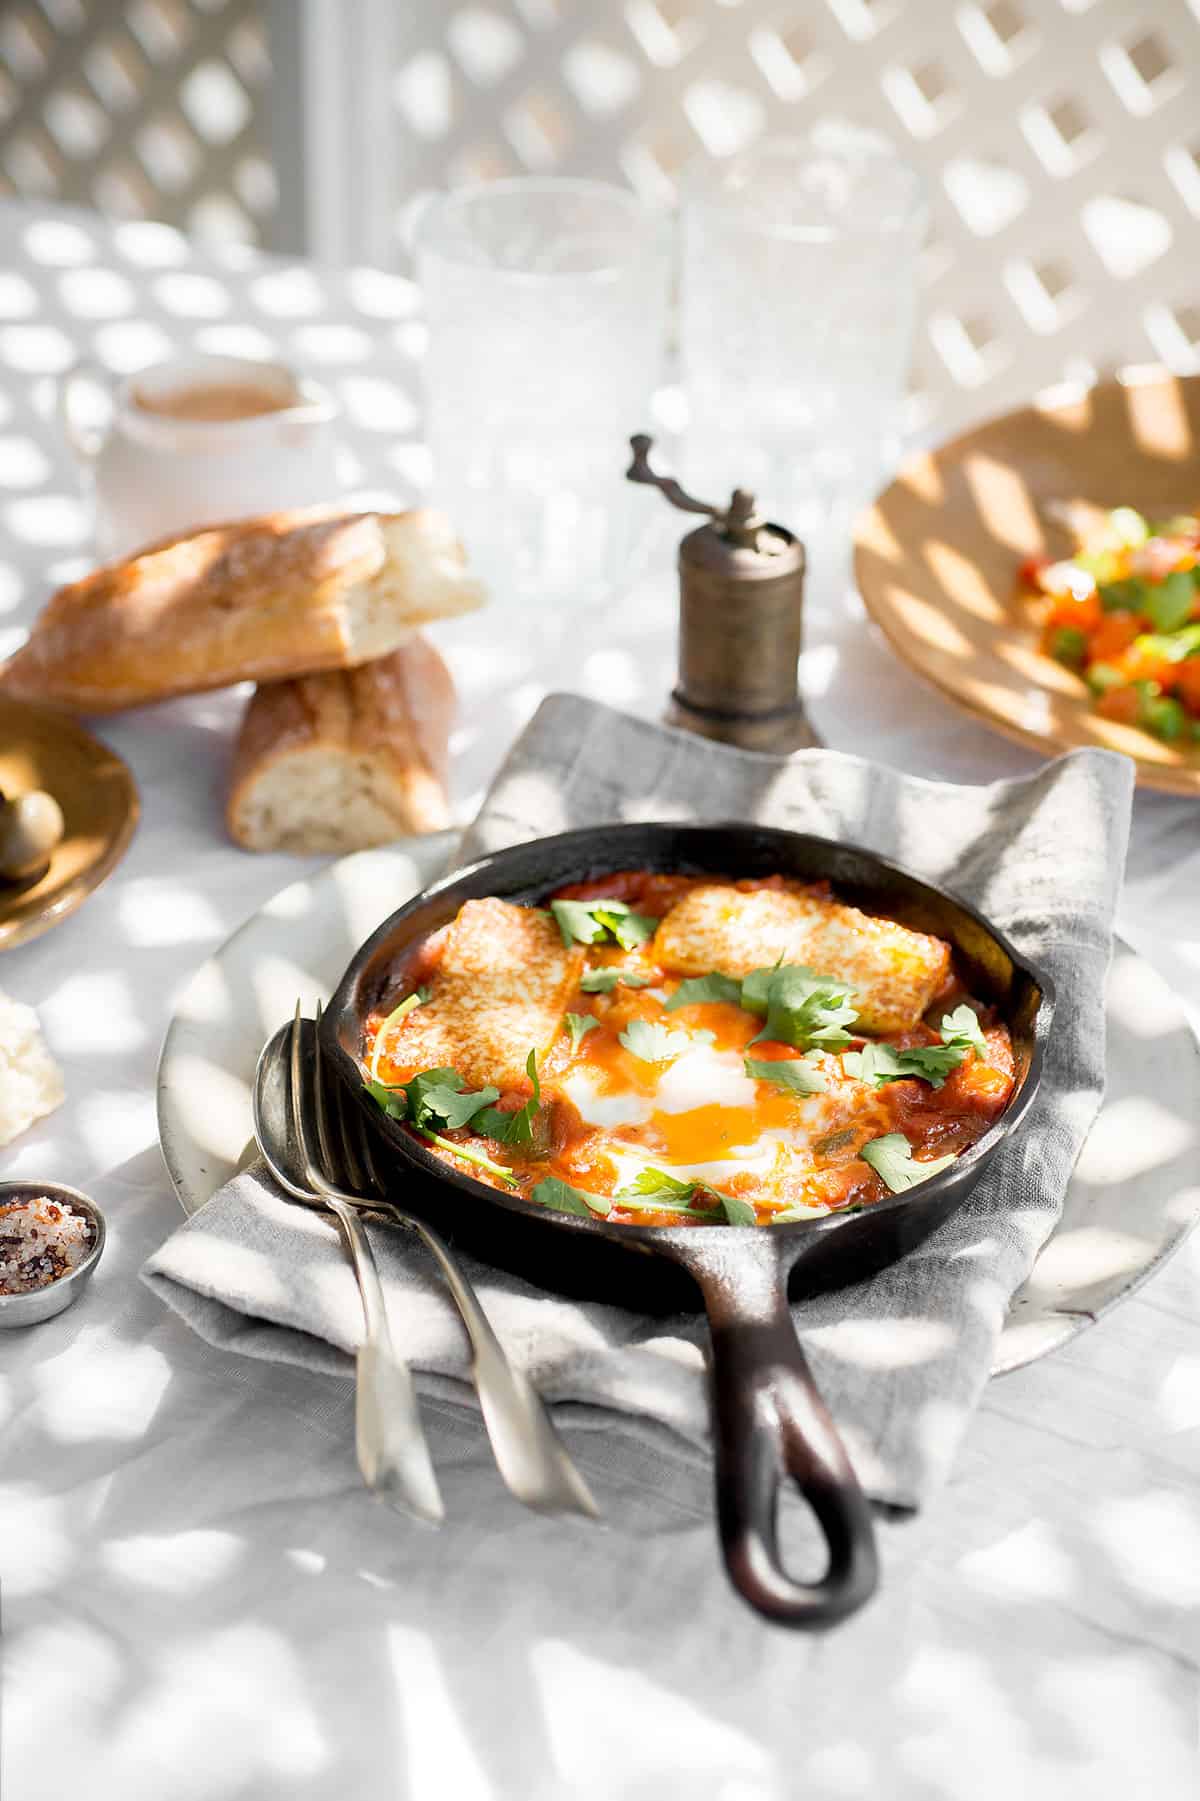 Eggs cooked in tomato sauce.